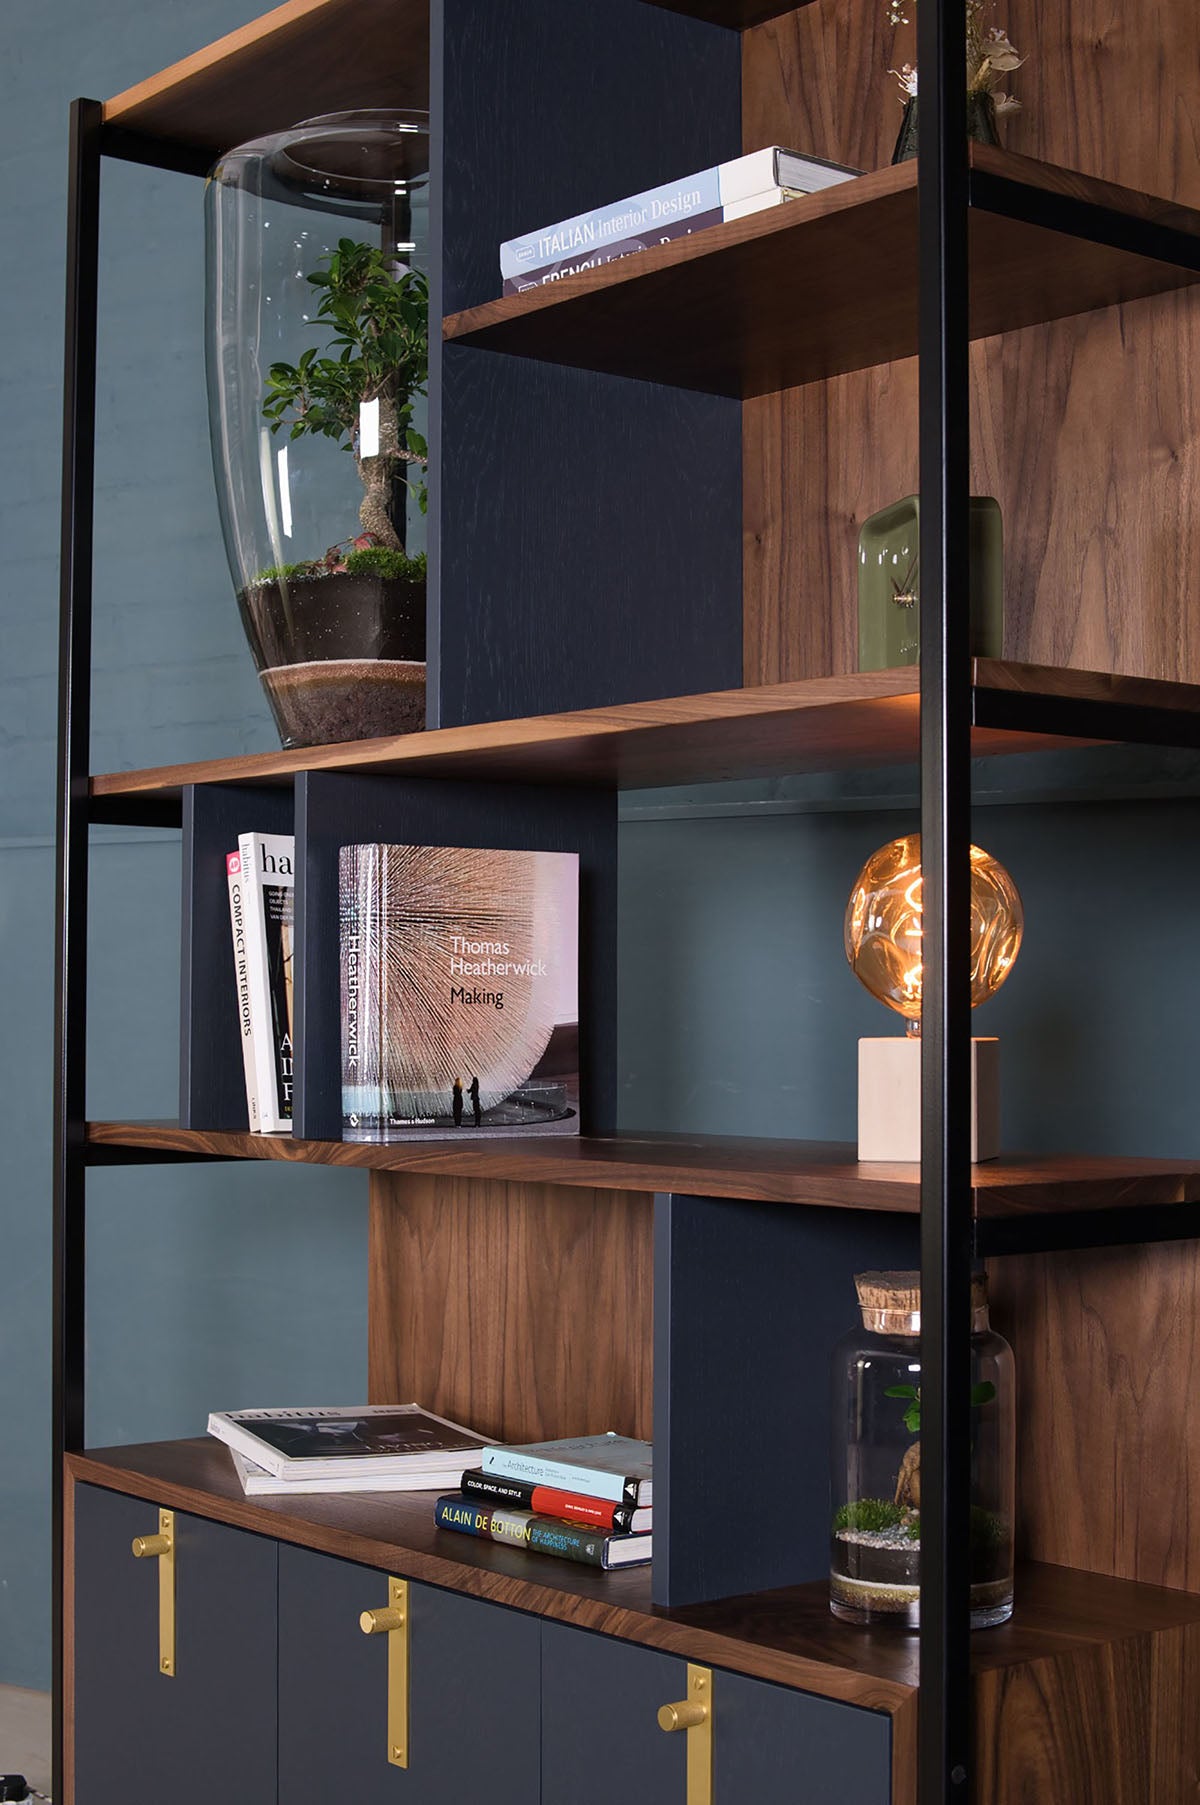 An image of the Walnut Bookcase, Hague product available from Koda Studios